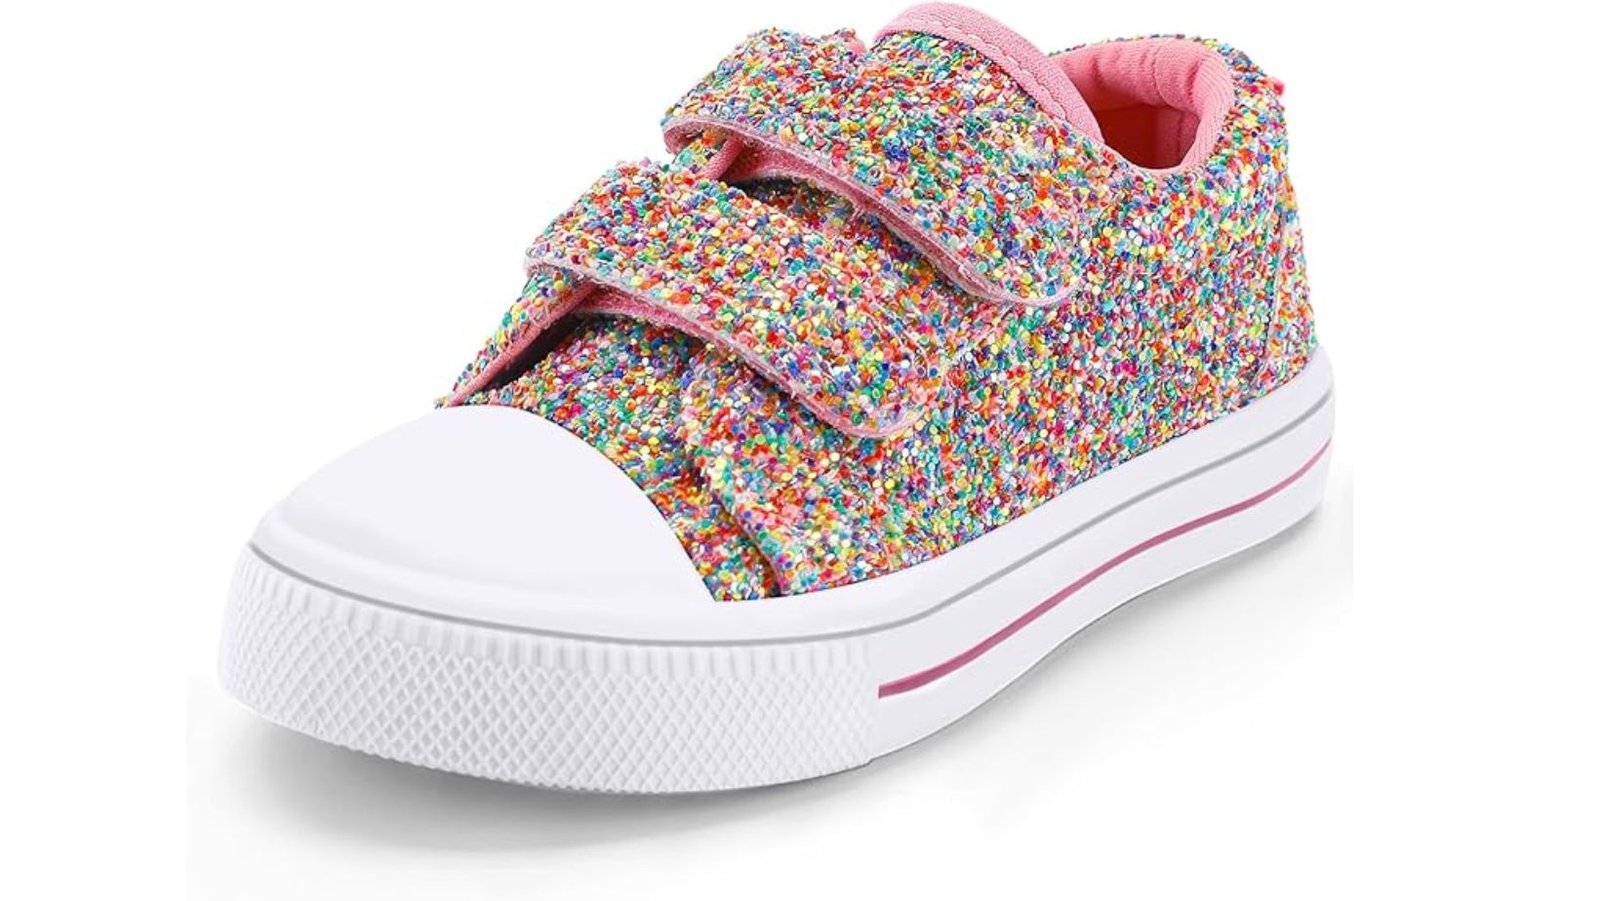 Best Back to School Shoes